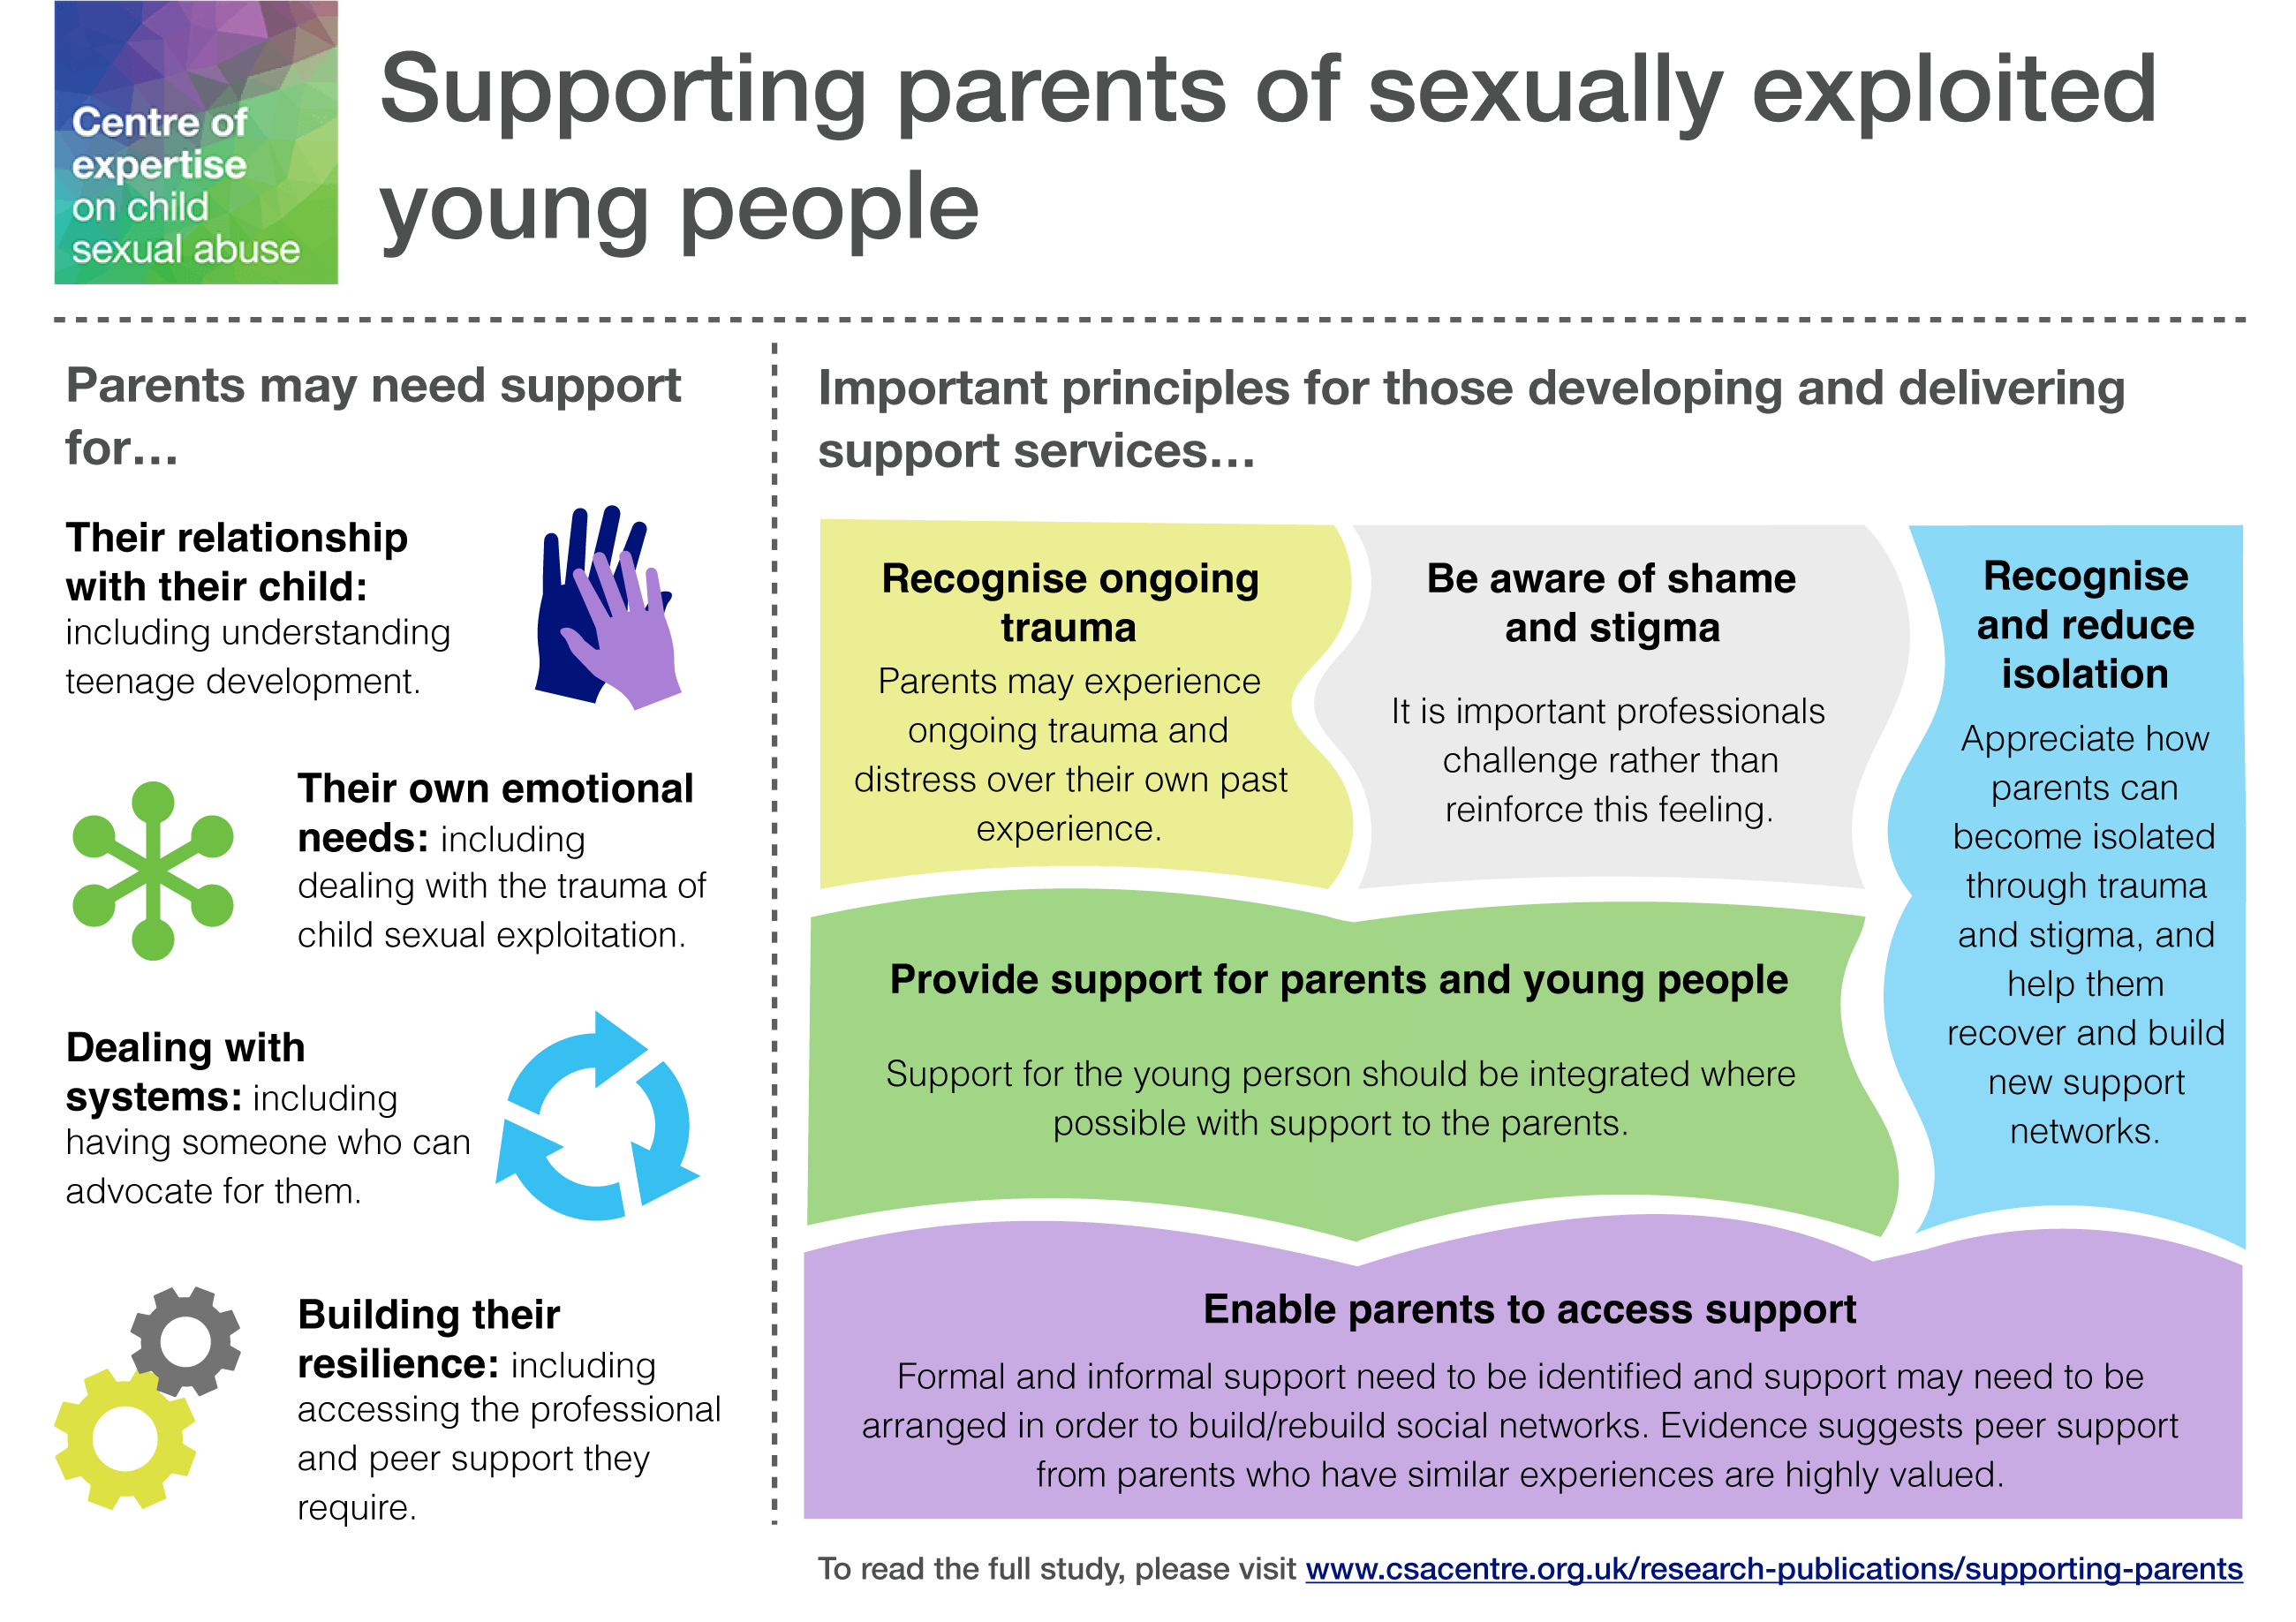 Centre of expertise on child sexual abuse infographic